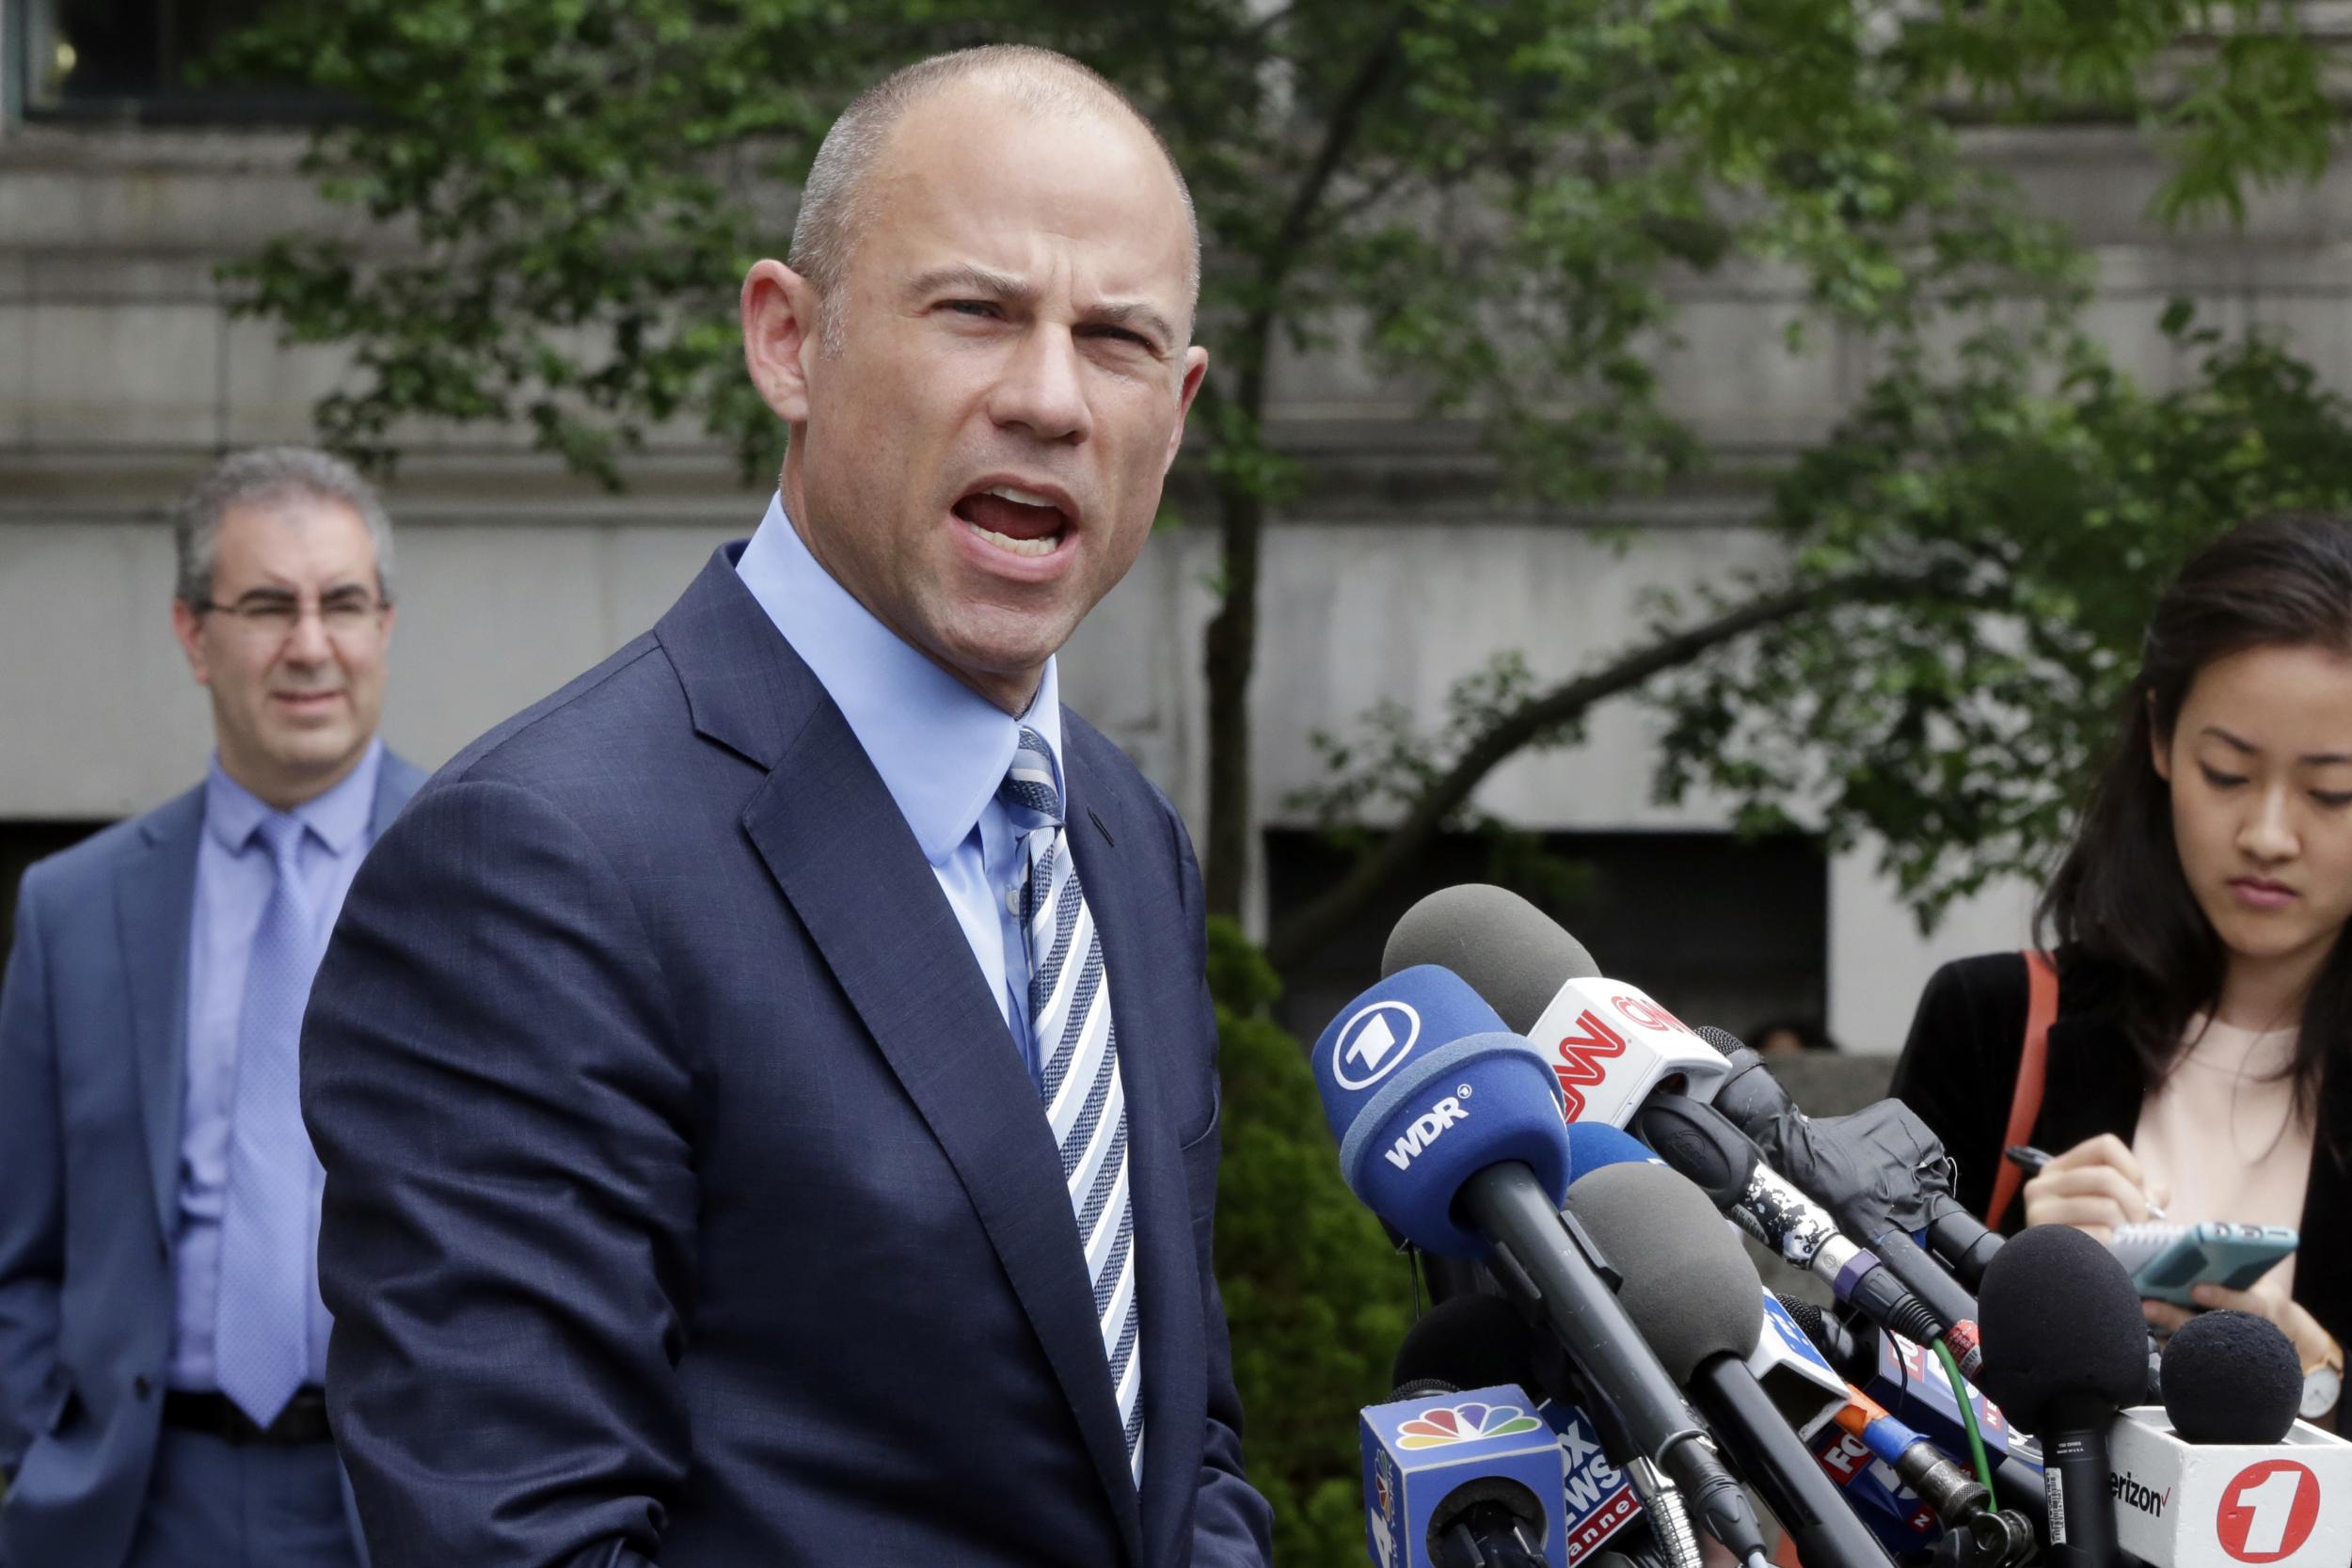 Lawyers for Stormy Daniels and Michael Cohen accuse each other of 'reckless, malicious ...